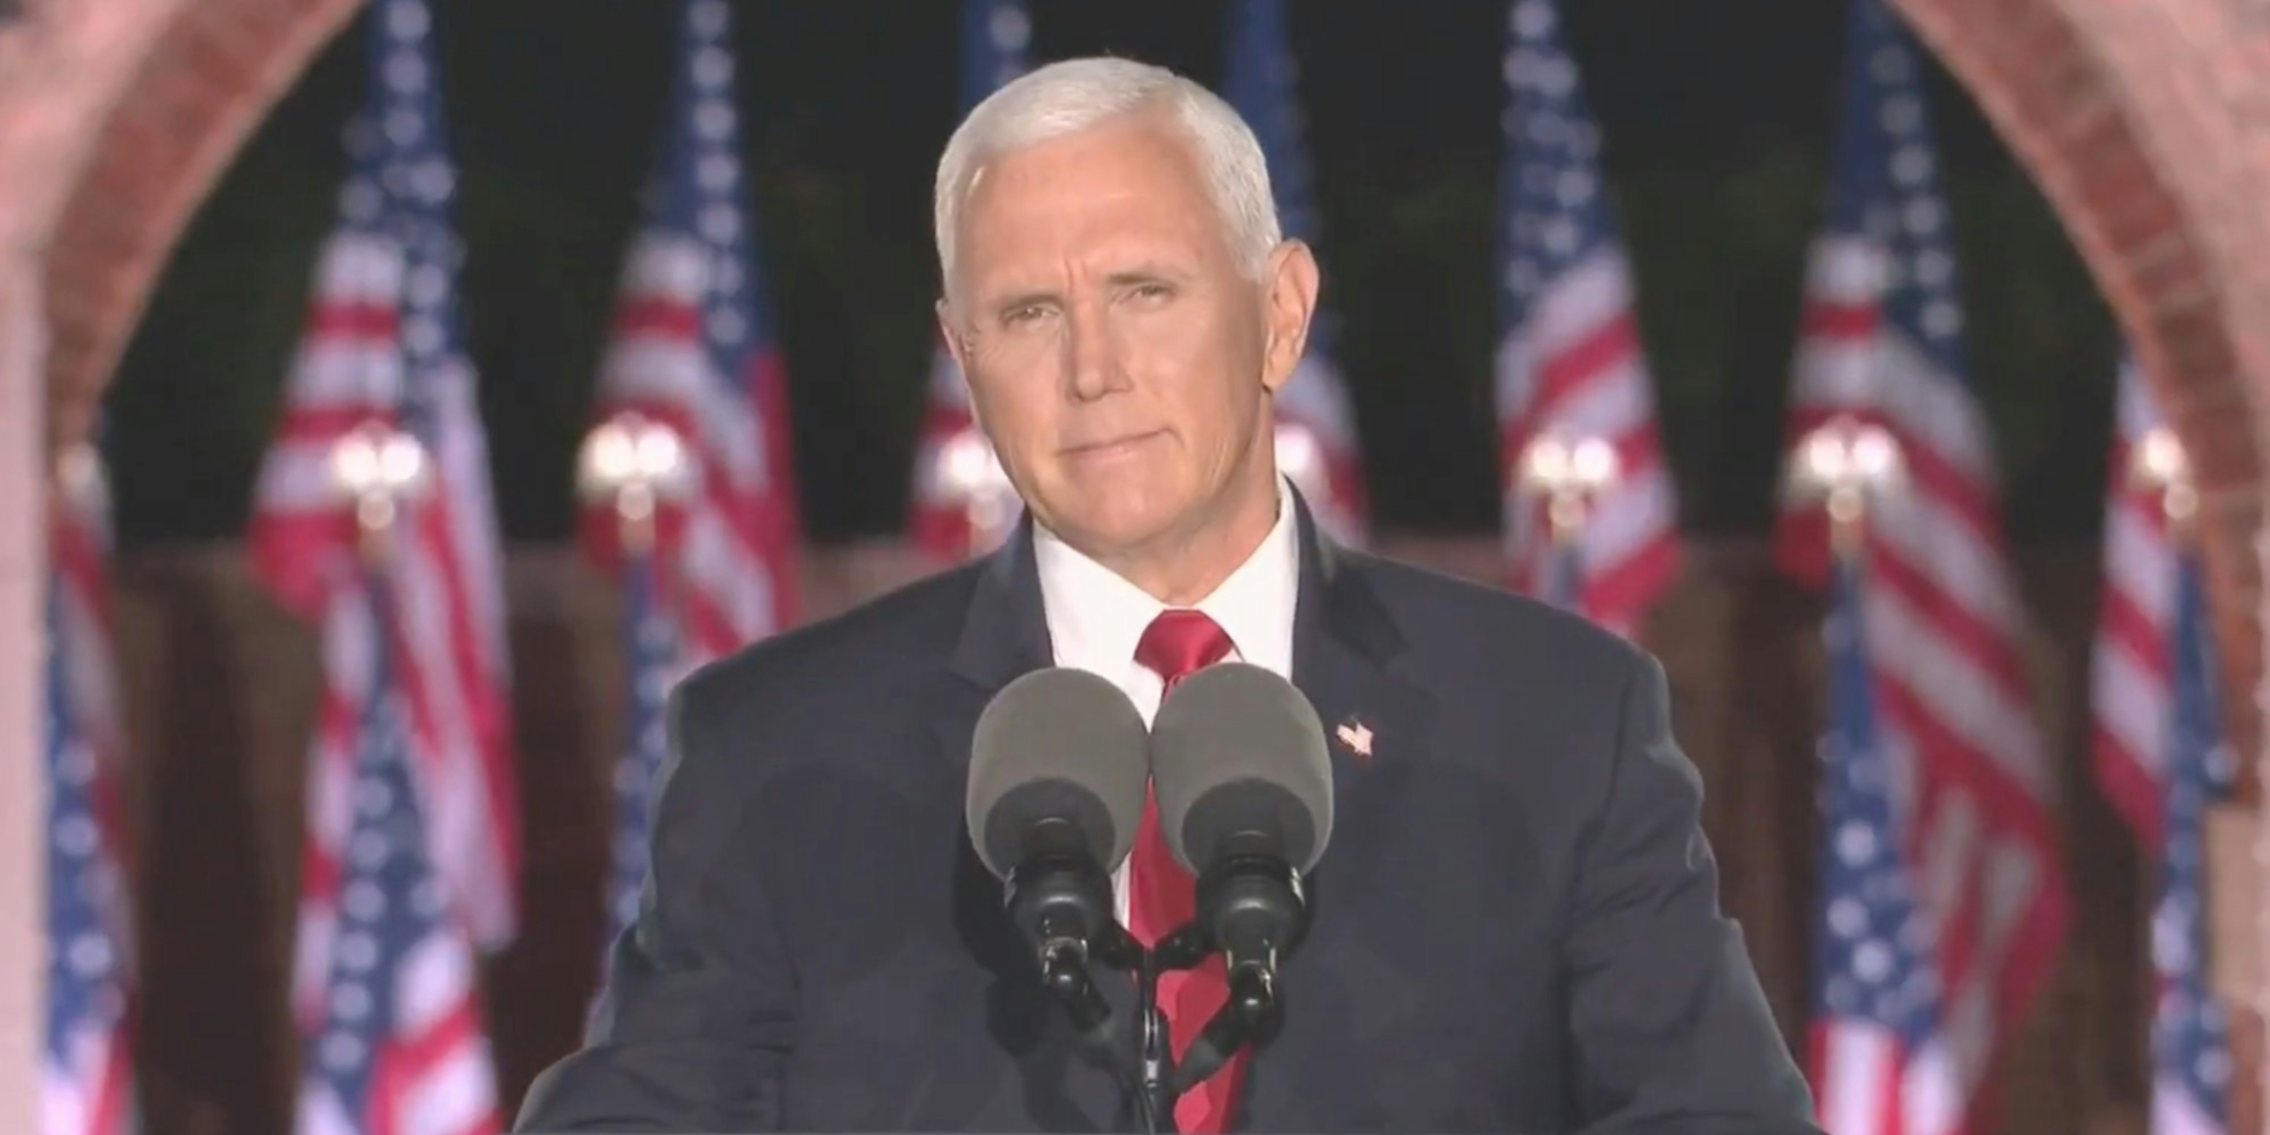 Vice President Mike Pence giving a speech